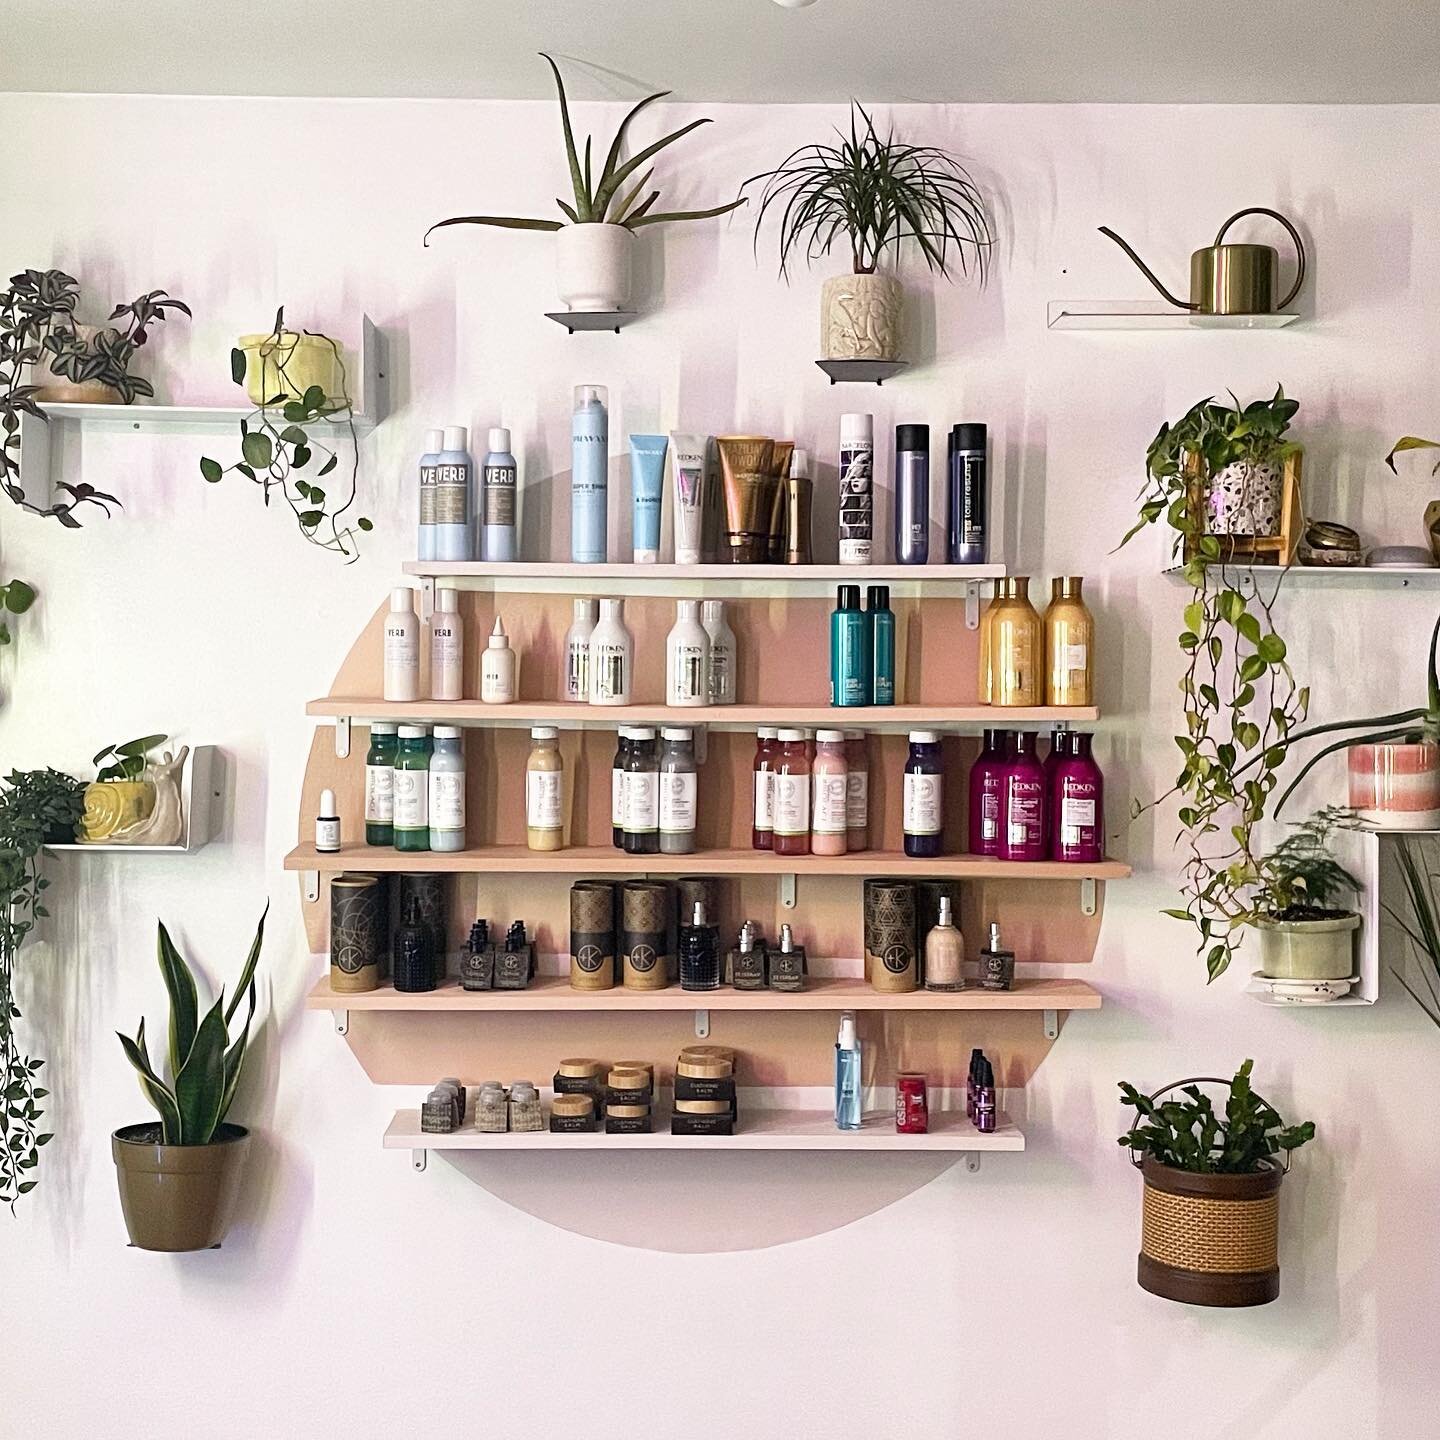 PRODUCT SALE!!!!!! BOGO 50% off of everything on these shelves. Come snag some shampoo or styling products, we are happy to suggest what we think would be best for your hair type 💗💗💗